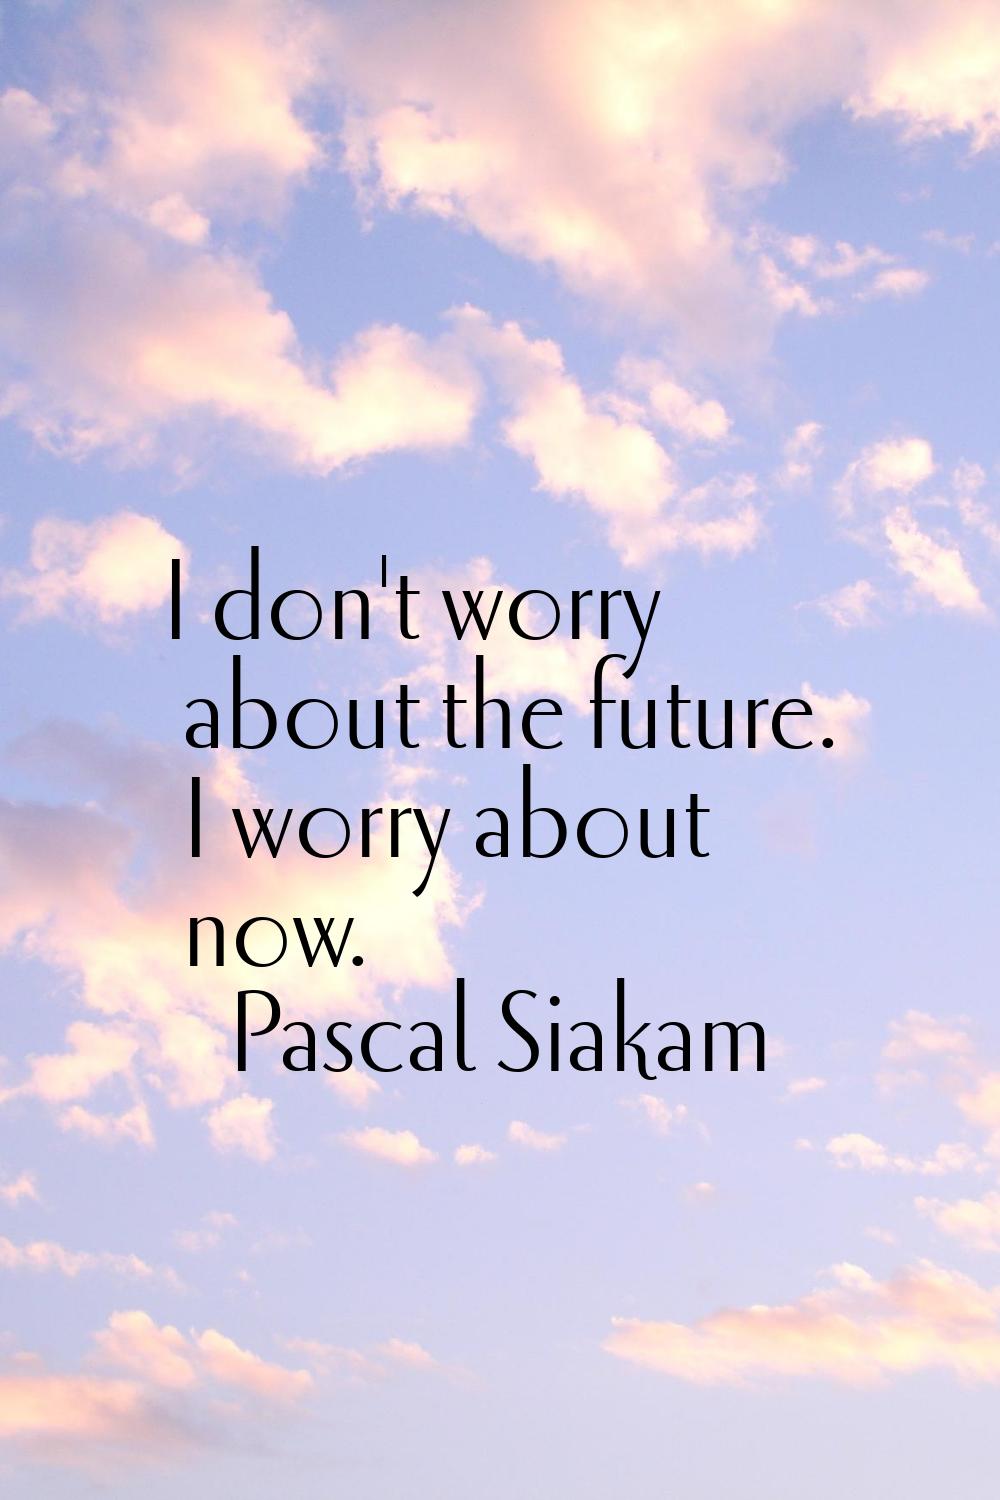 I don't worry about the future. I worry about now.